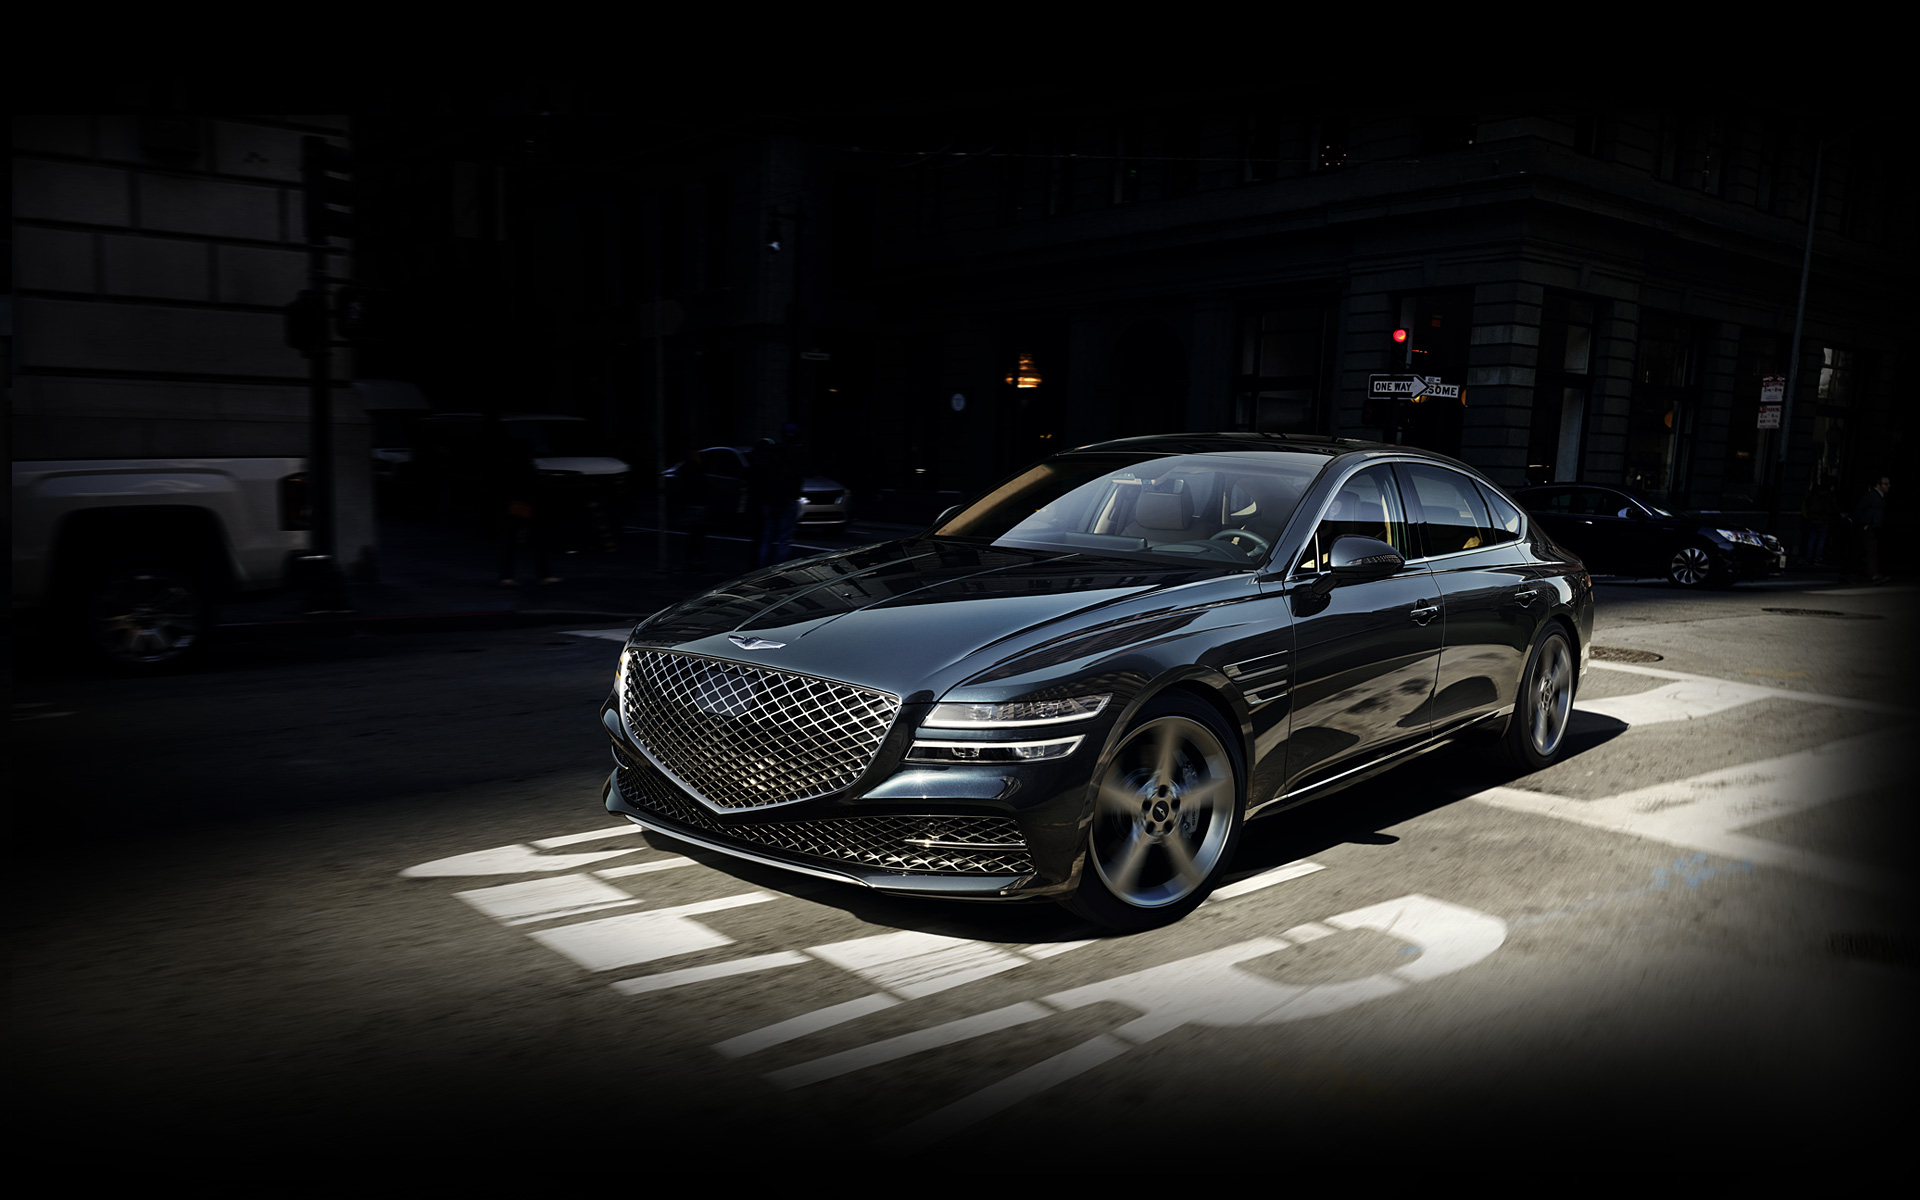 The-all-new-genesis-g80-highlight-discover